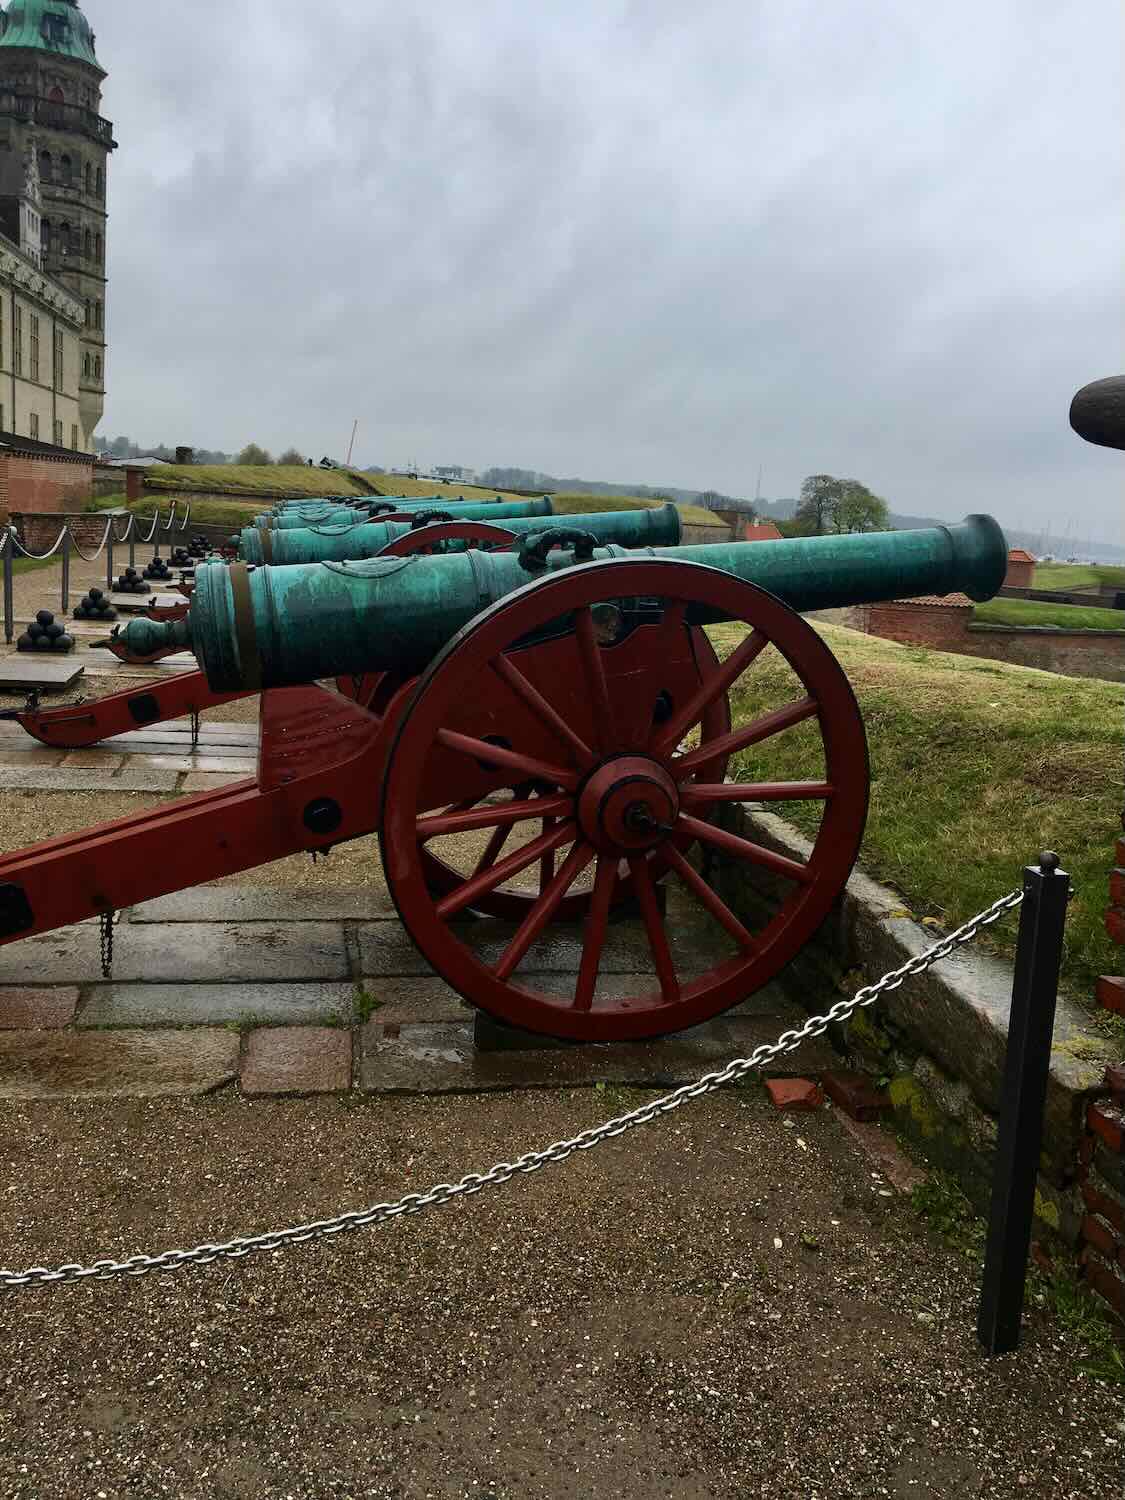 Cannons at the Kronborg castle